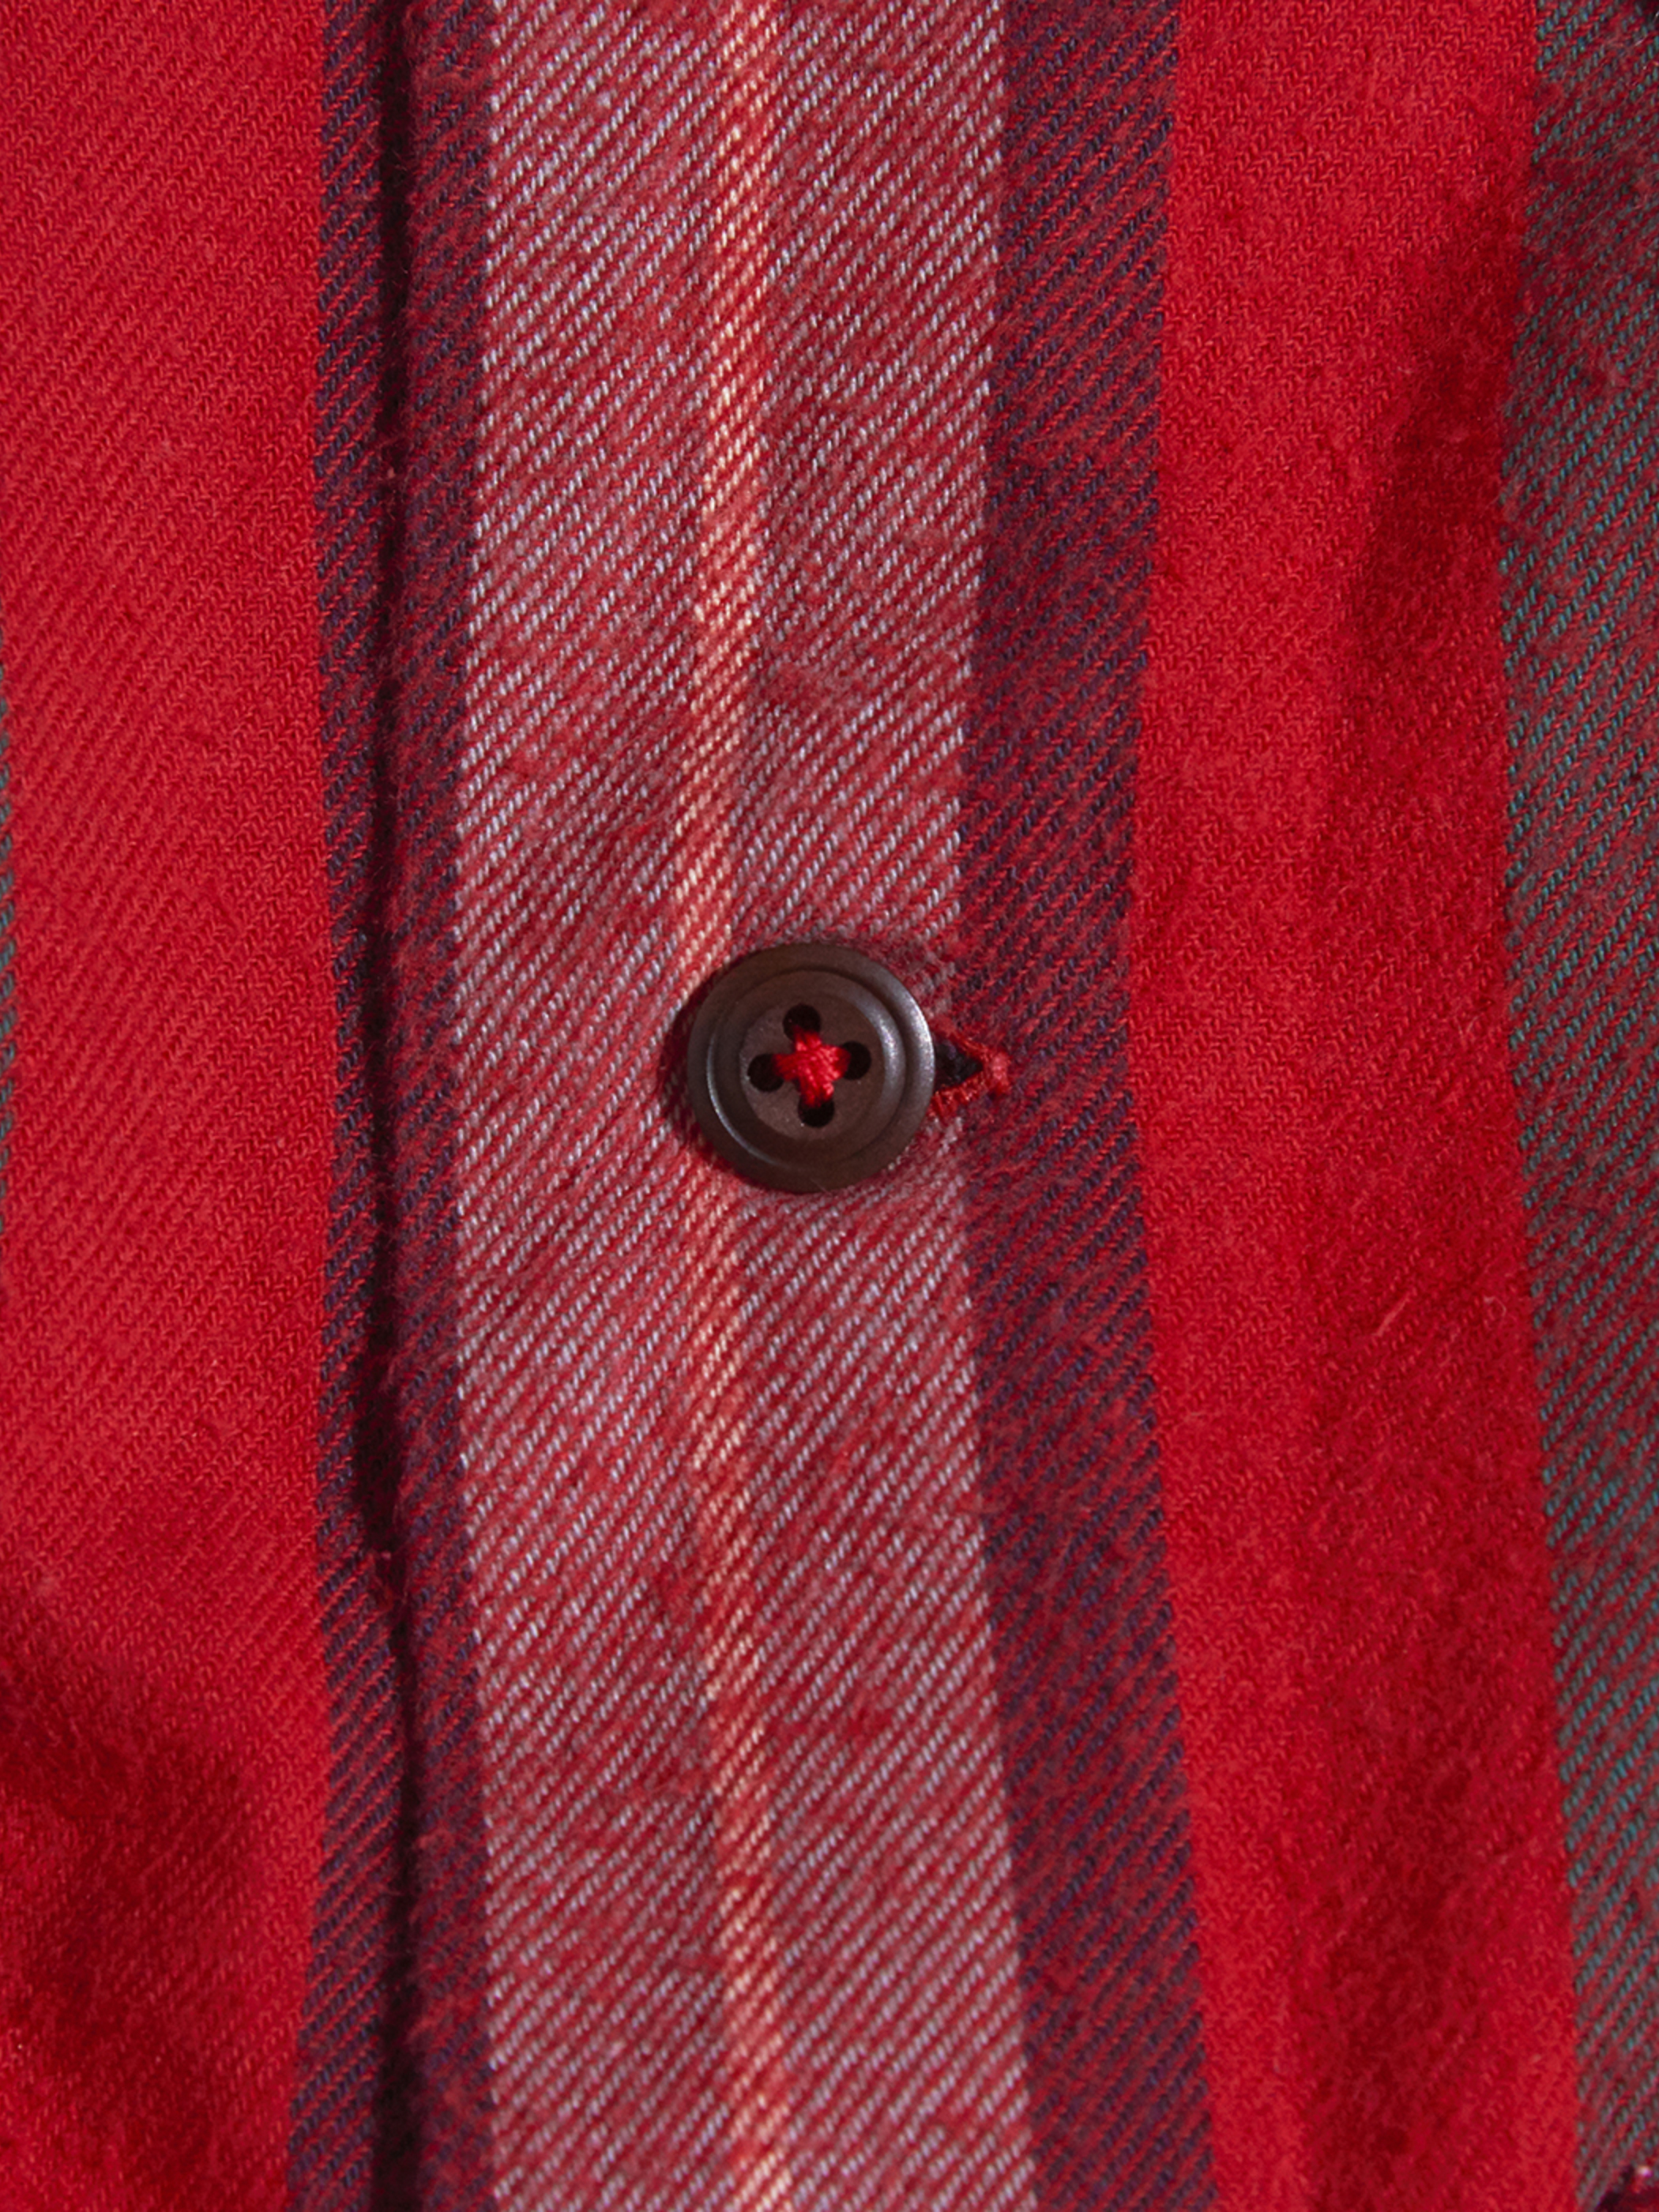 1980s "RALPH LAUREN COUNTRY" flannel check shirt -RED-